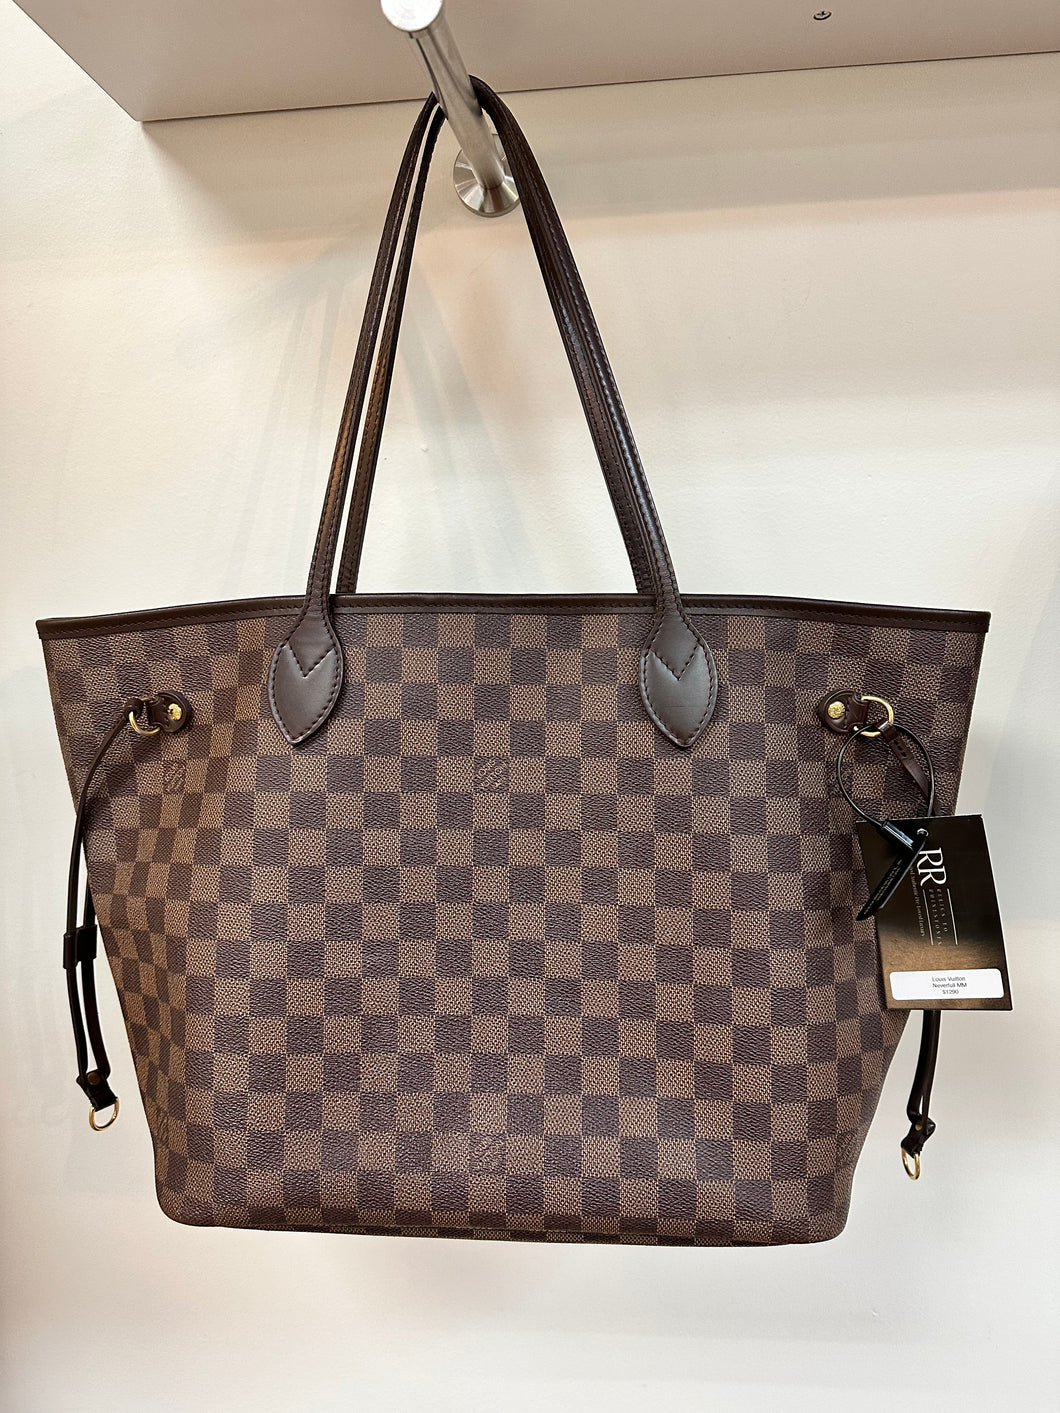 Authentic Louis Vuitton Neverfull mm